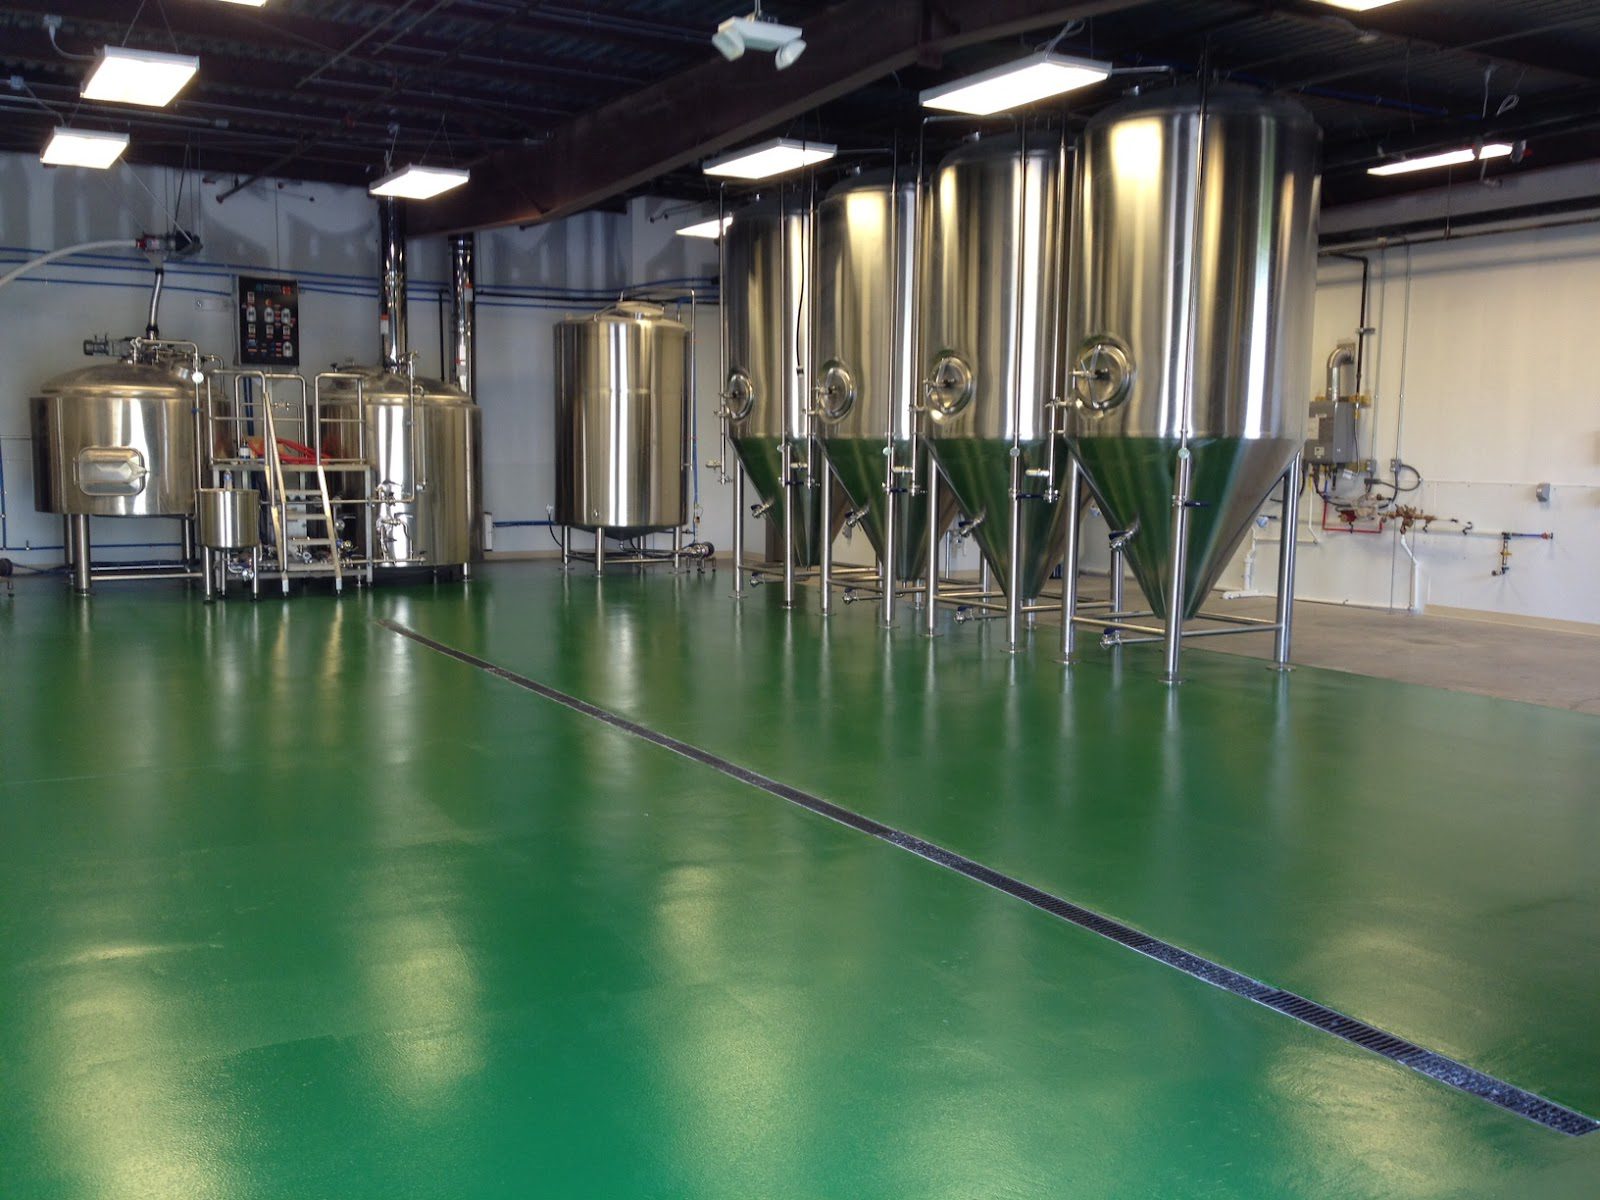 nbspHow to Choose Flooring for Your Restaurant or Brewery | Duraamen Engineered Products Inc